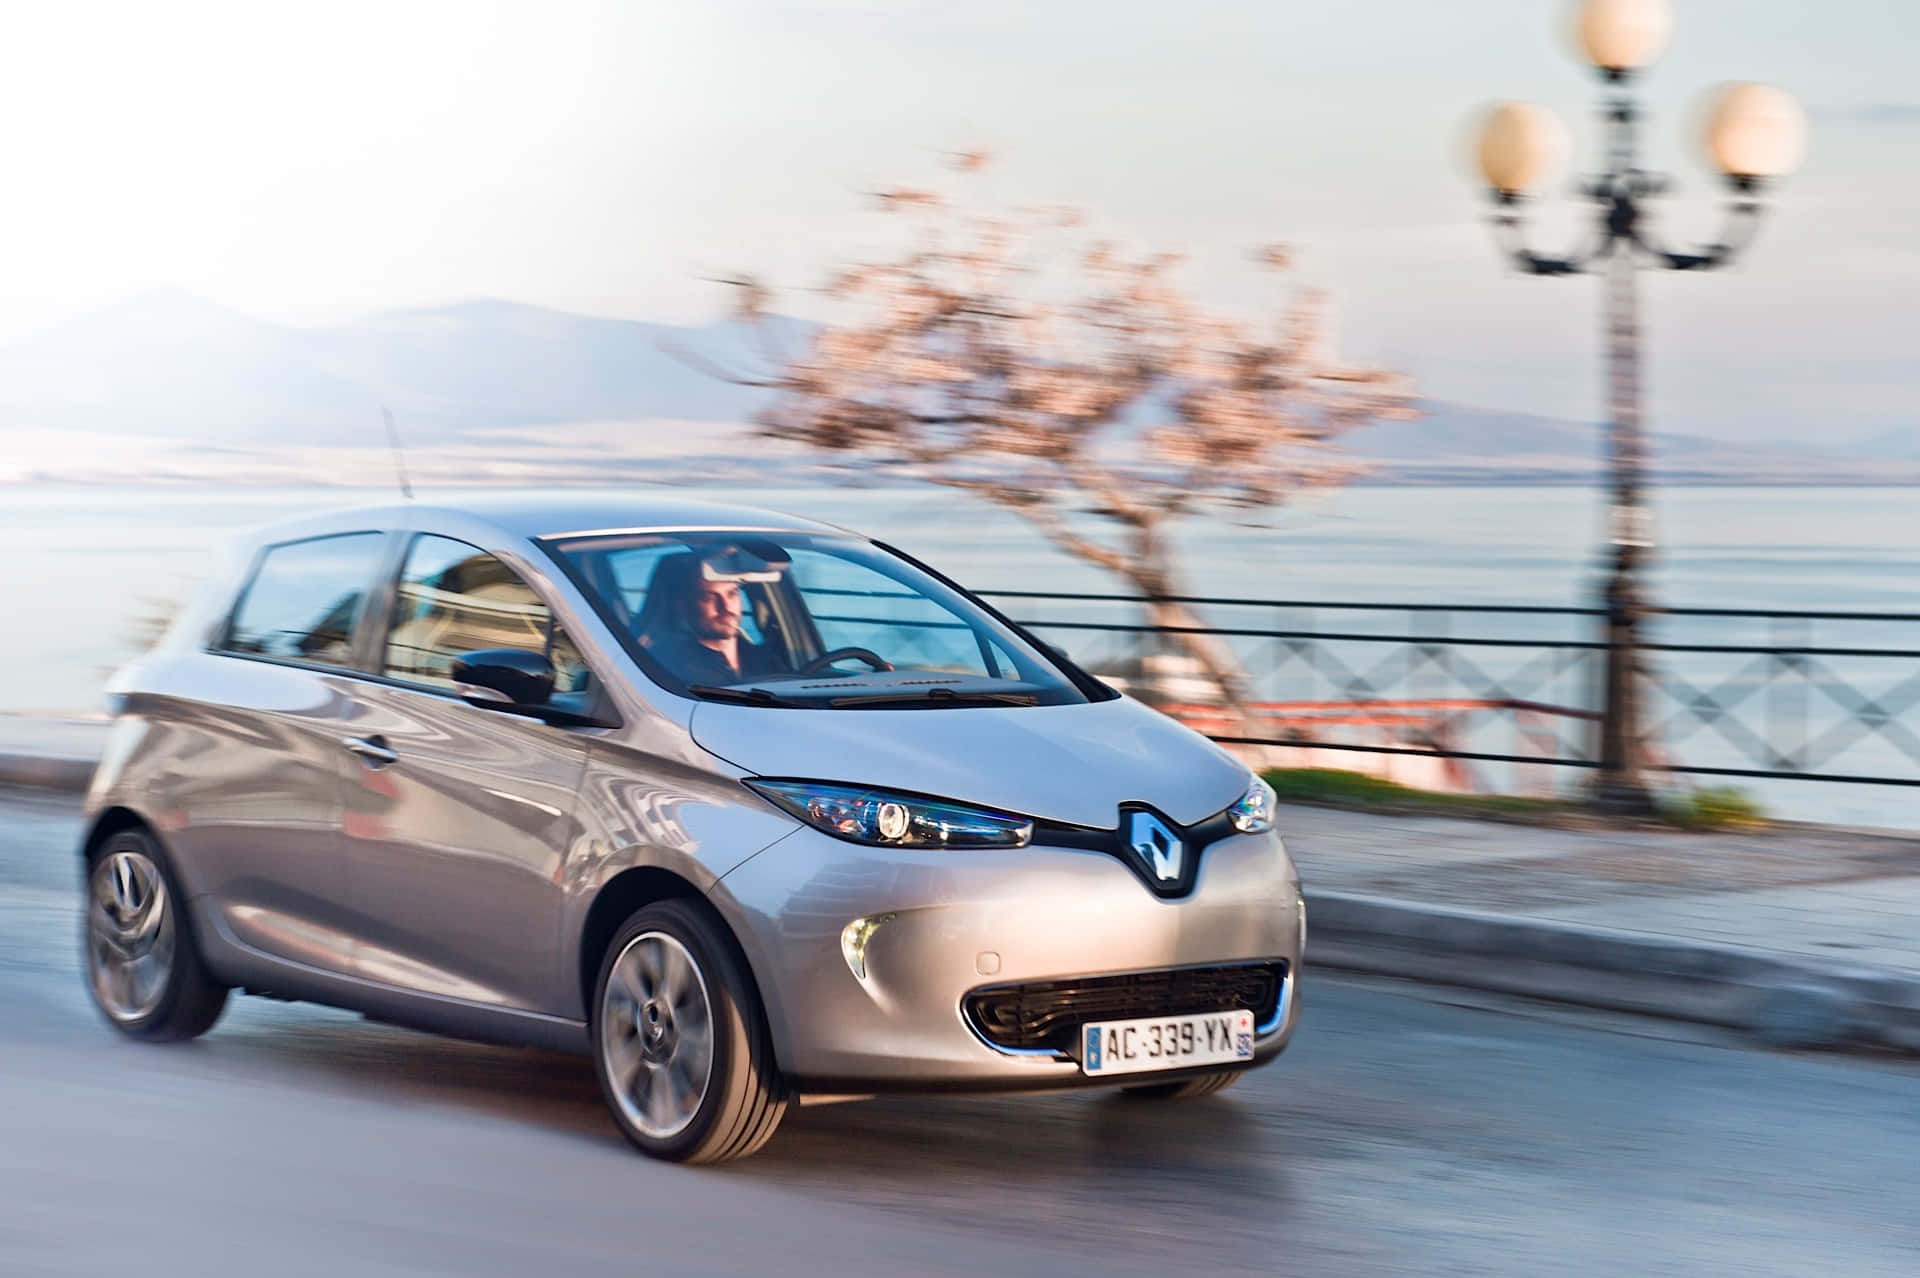 Caption: The Sleek And Modern Renault Zoe - An Eco-friendly Driving Experience. Wallpaper